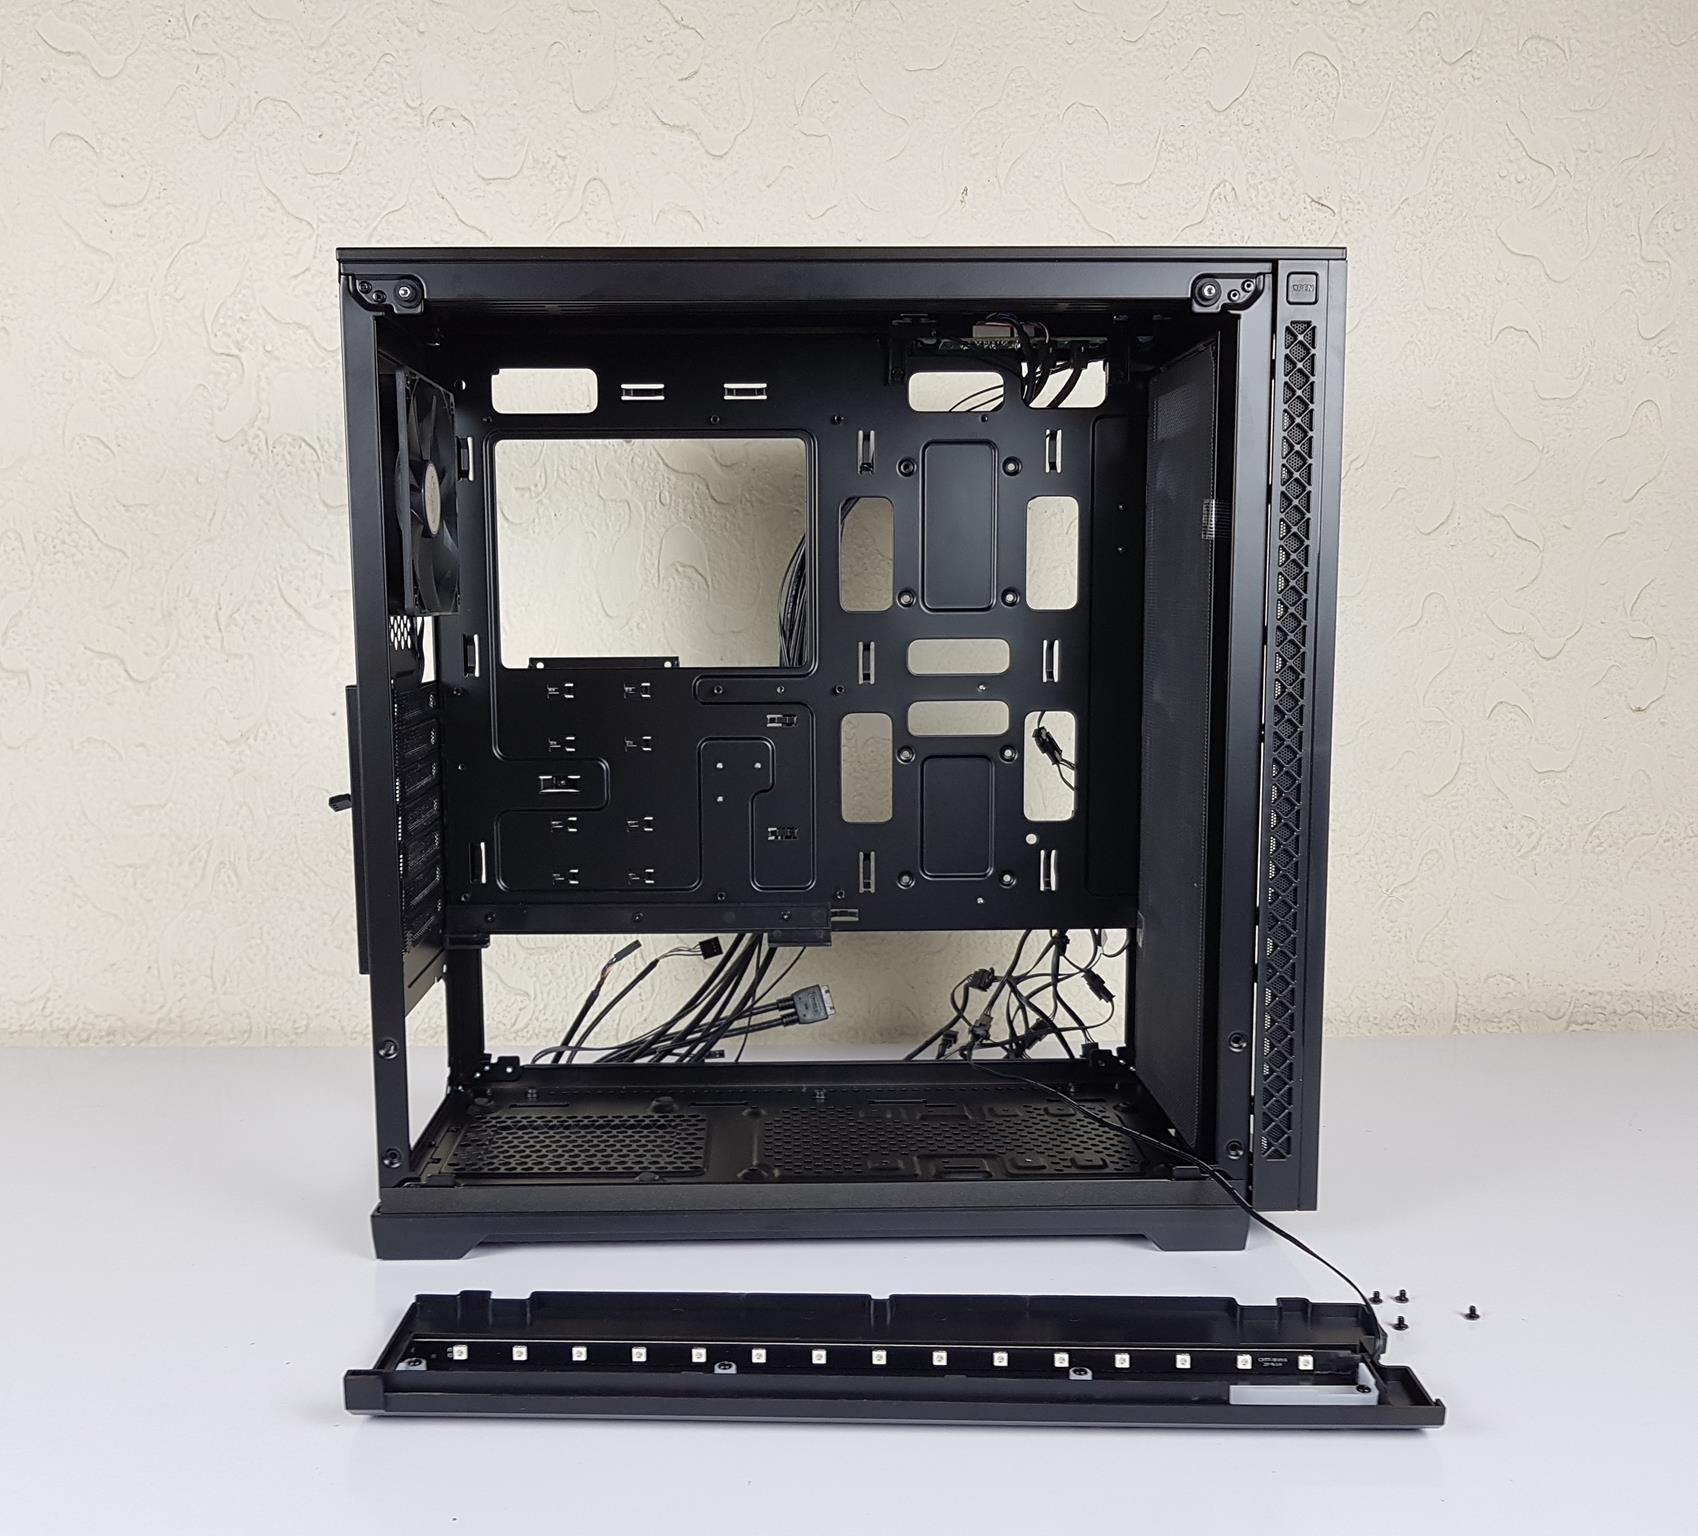 DeepCool MATREXX 70 ADD-RGB 3F — The size of the chassis